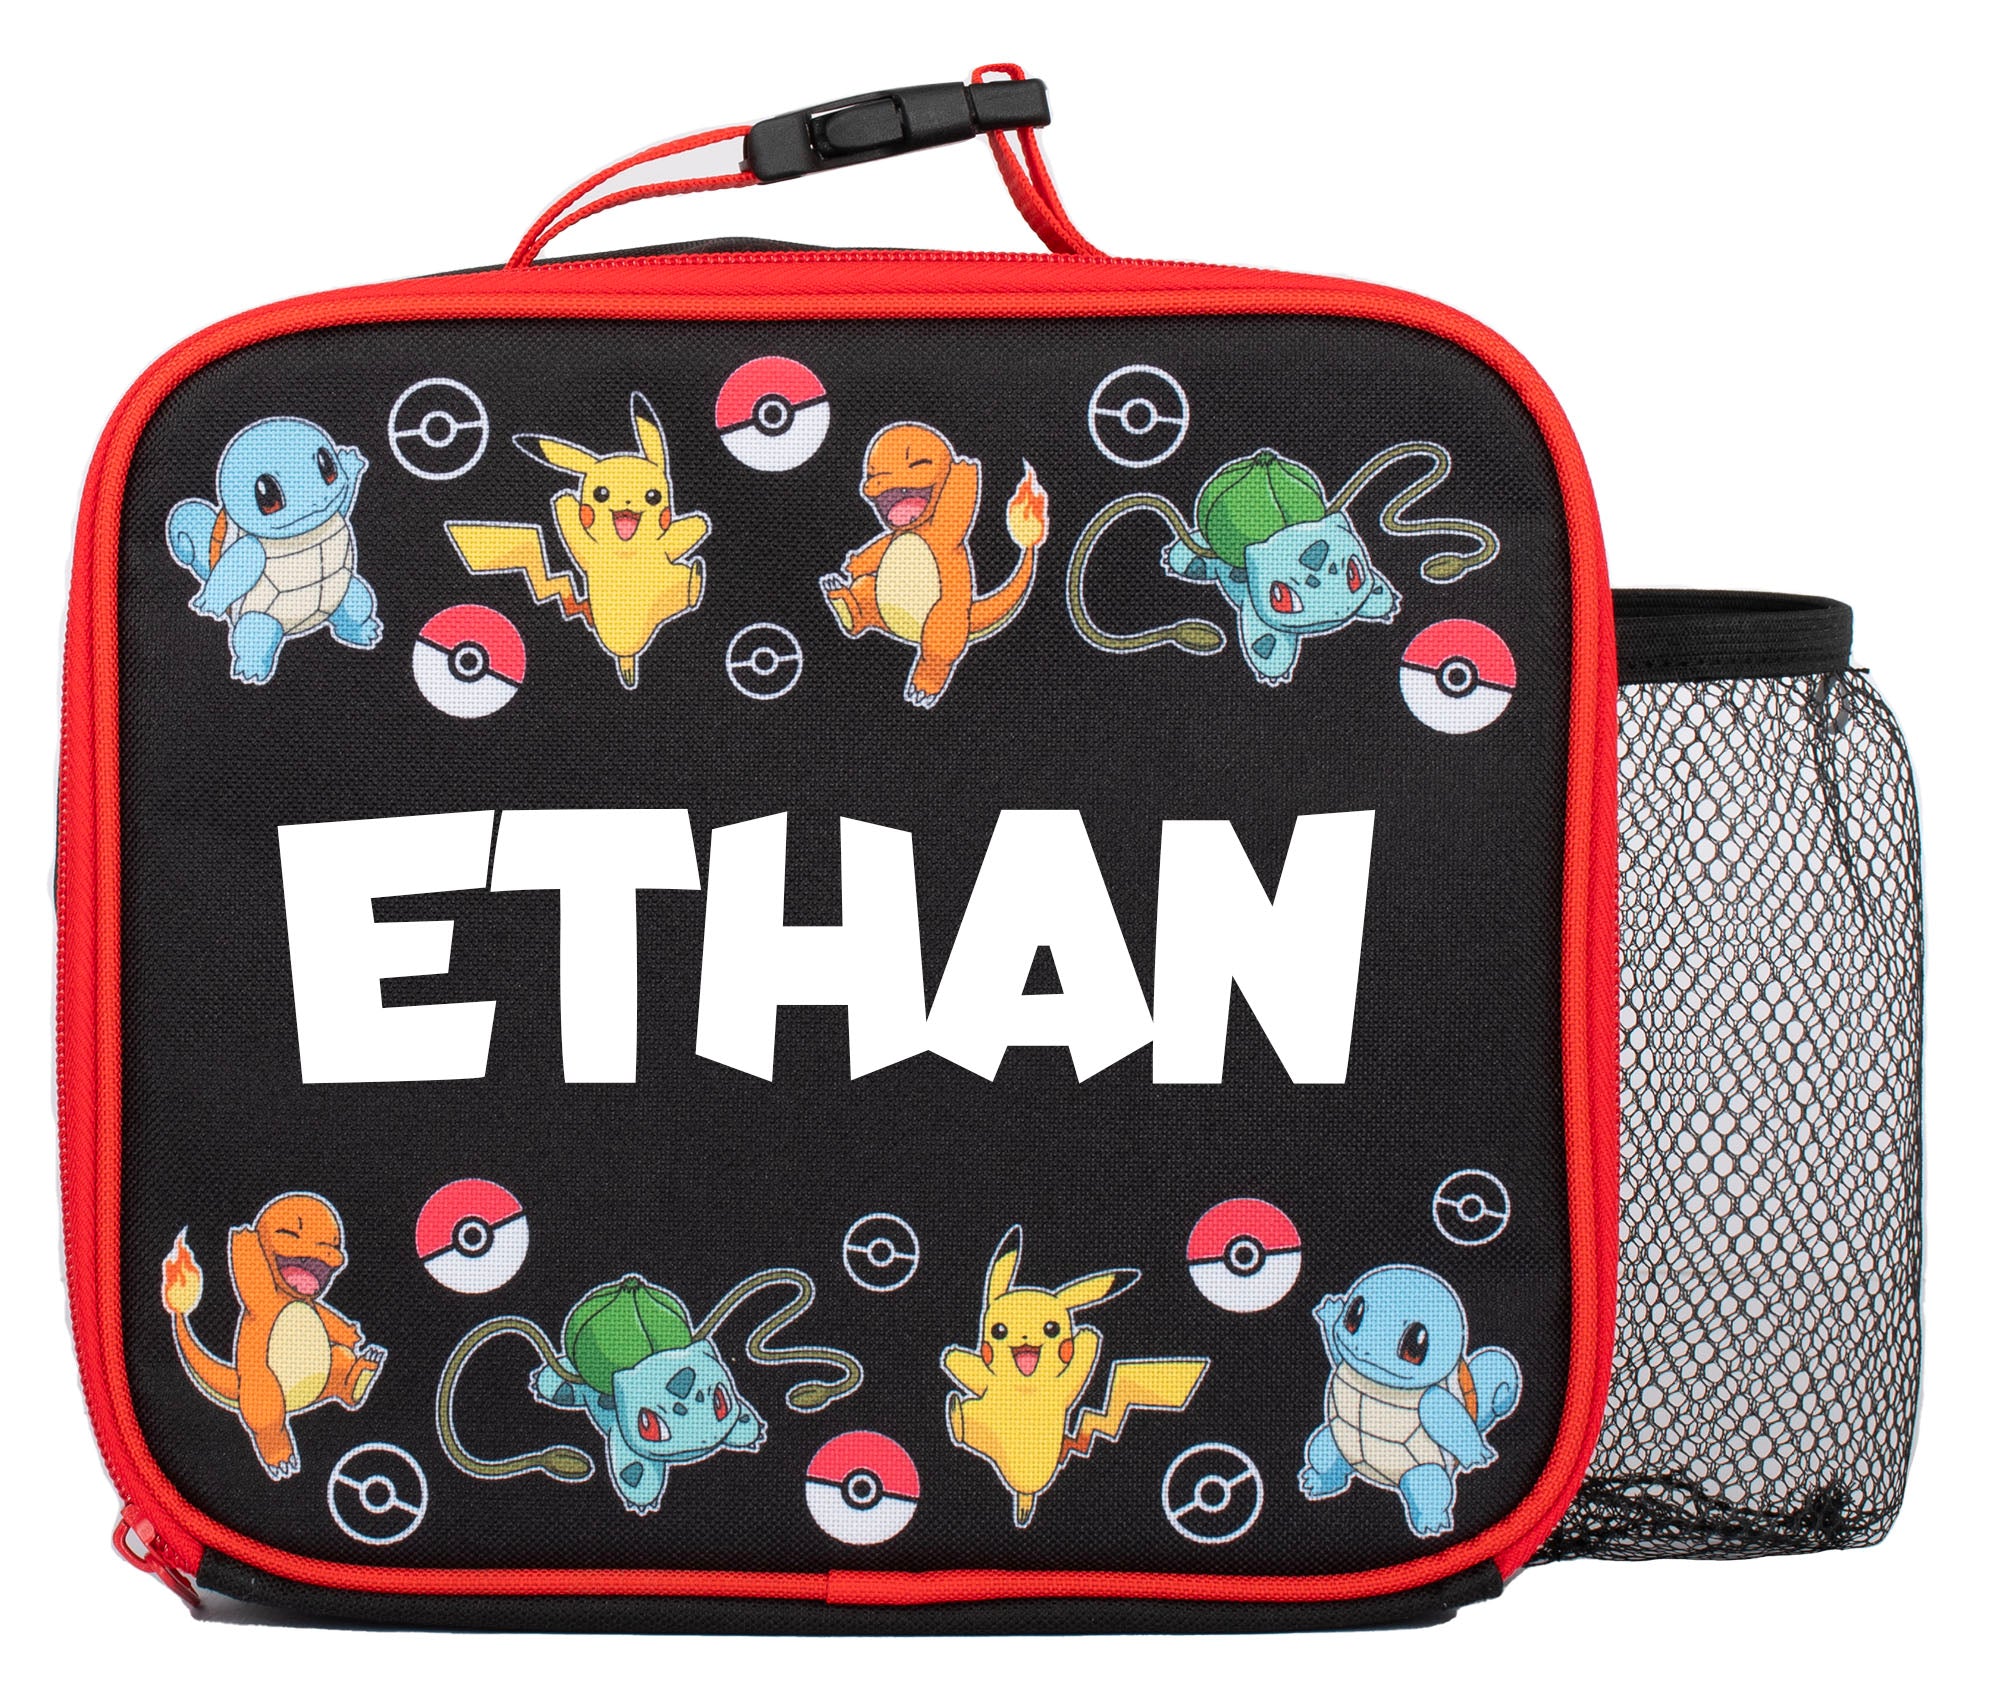 Thermos Pokemon Dual Compartment Lunch Bag 1 ct